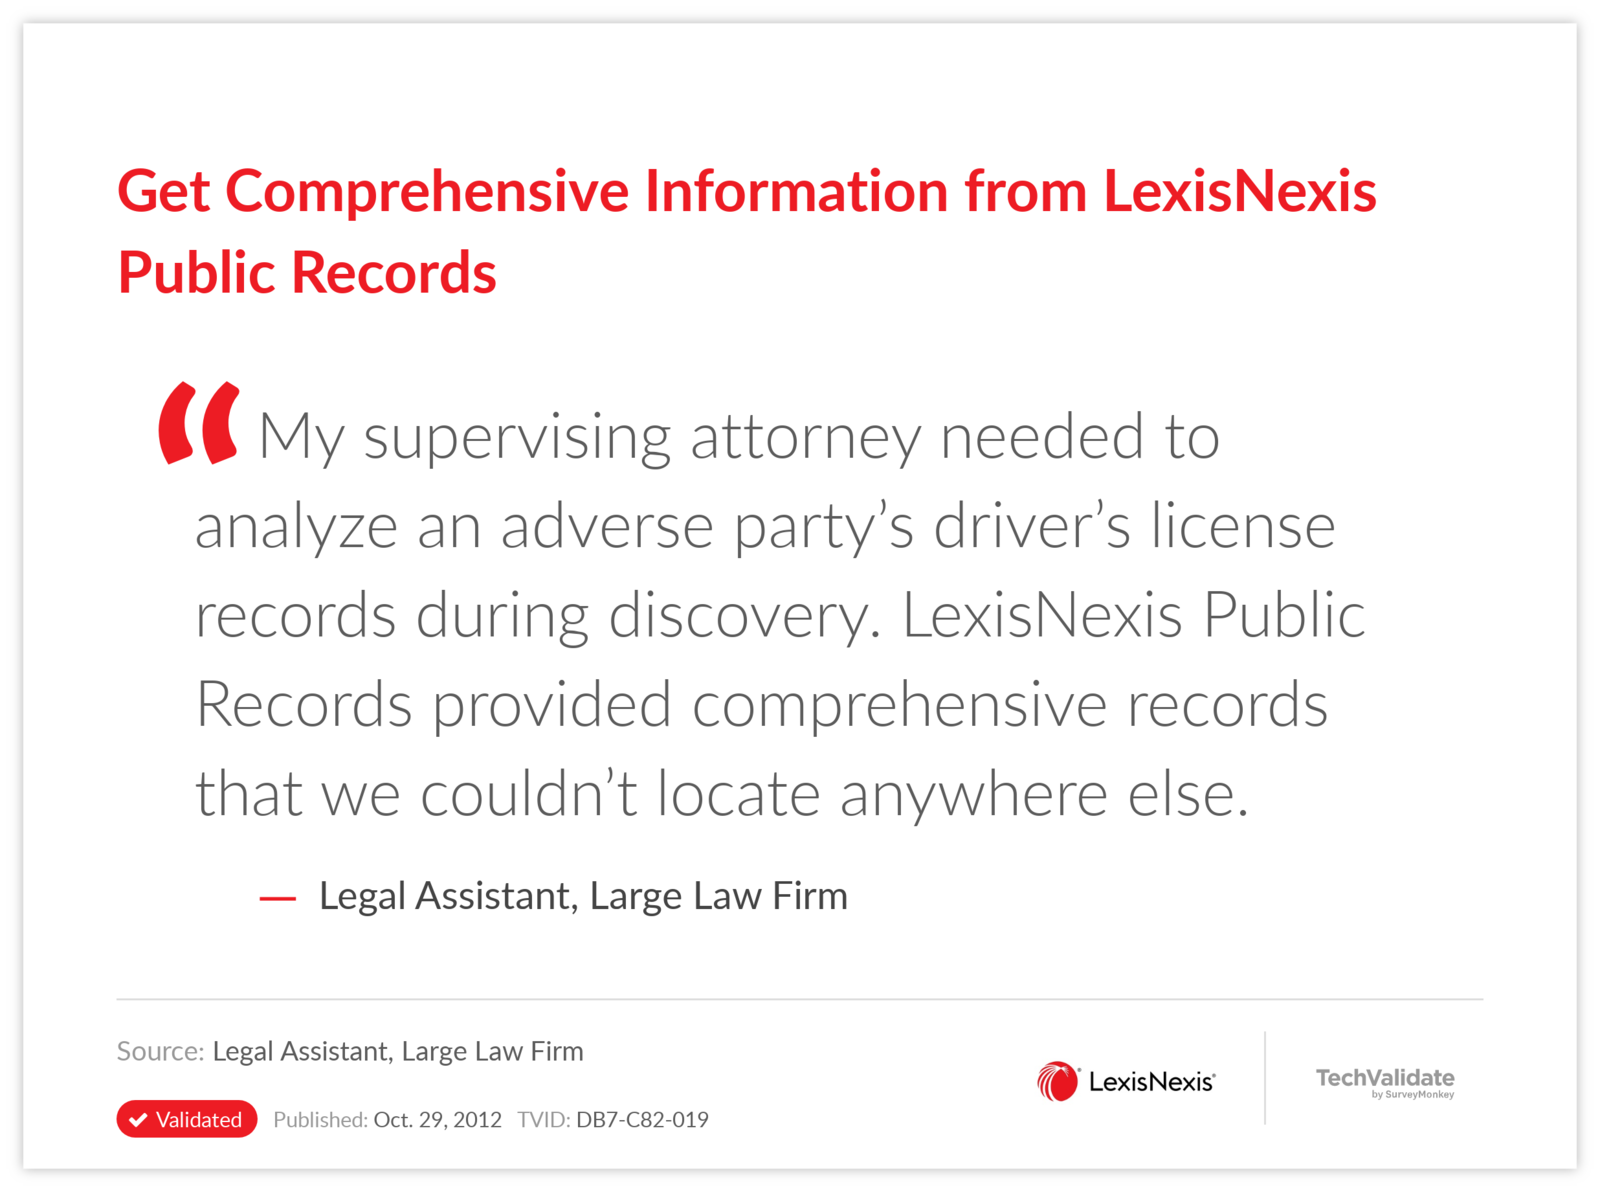 Get Comprehensive Information from LexisNexis Public Records